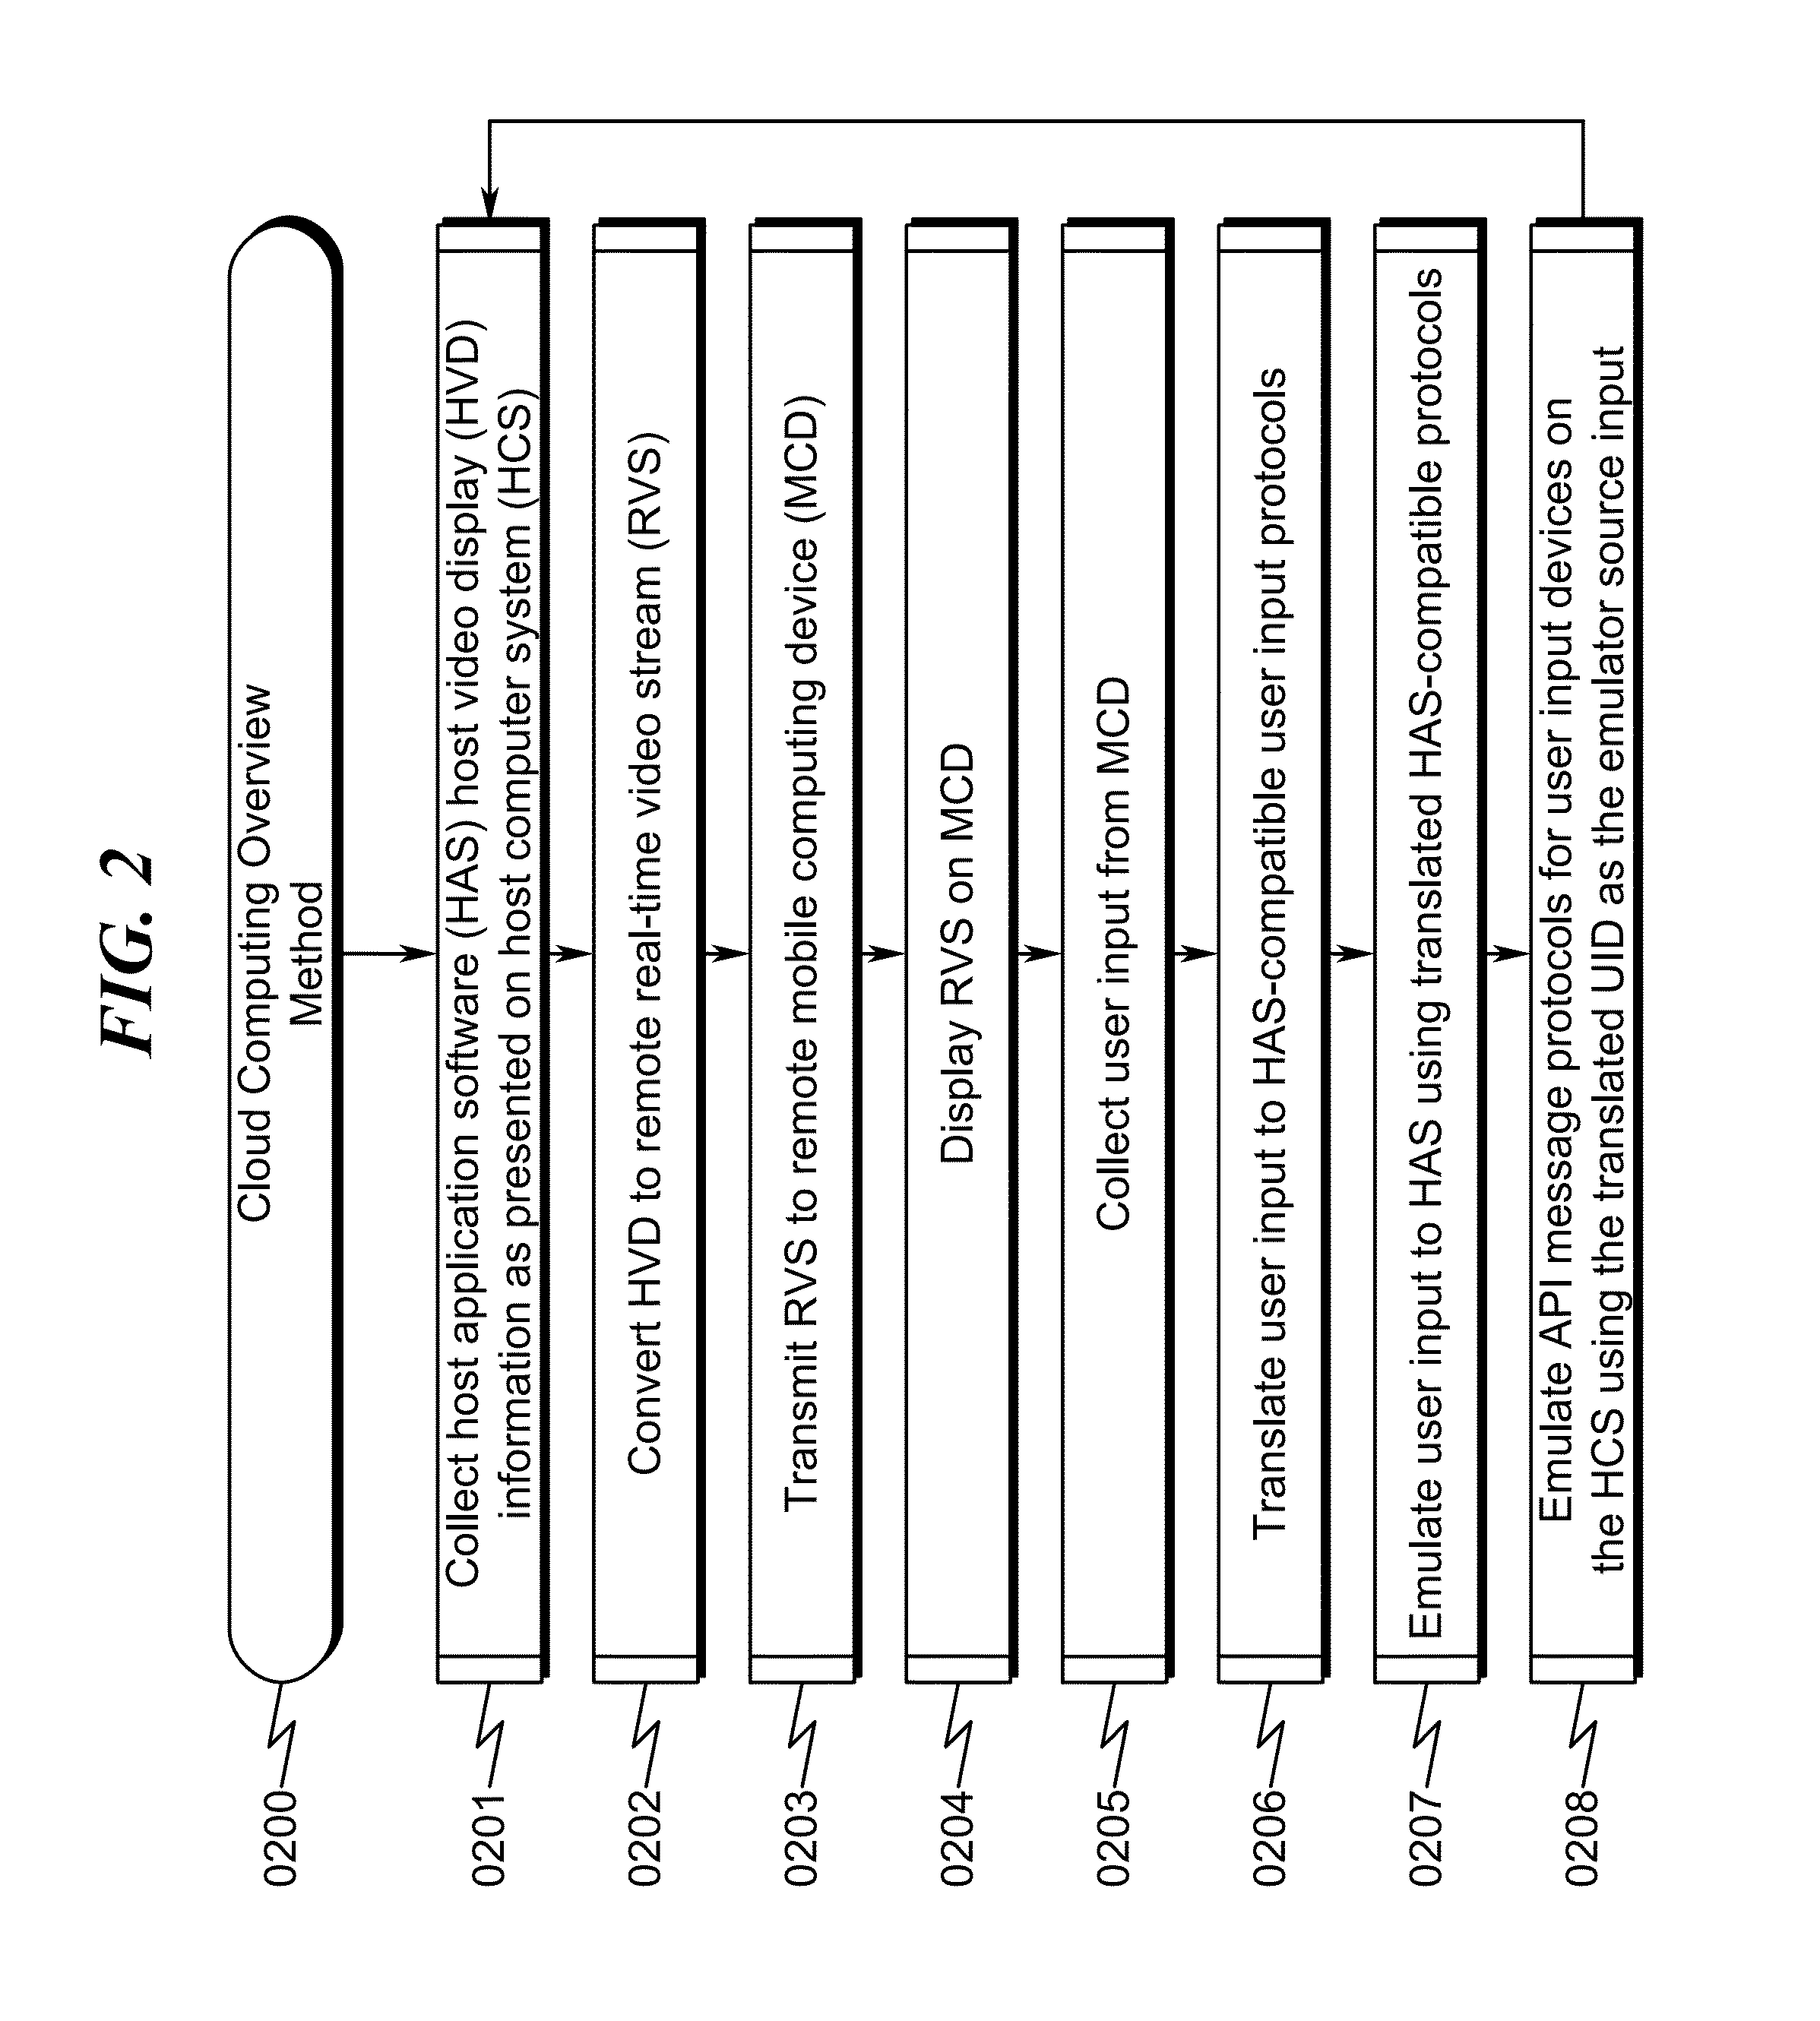 Real-time dynamic hyperlinking system and method